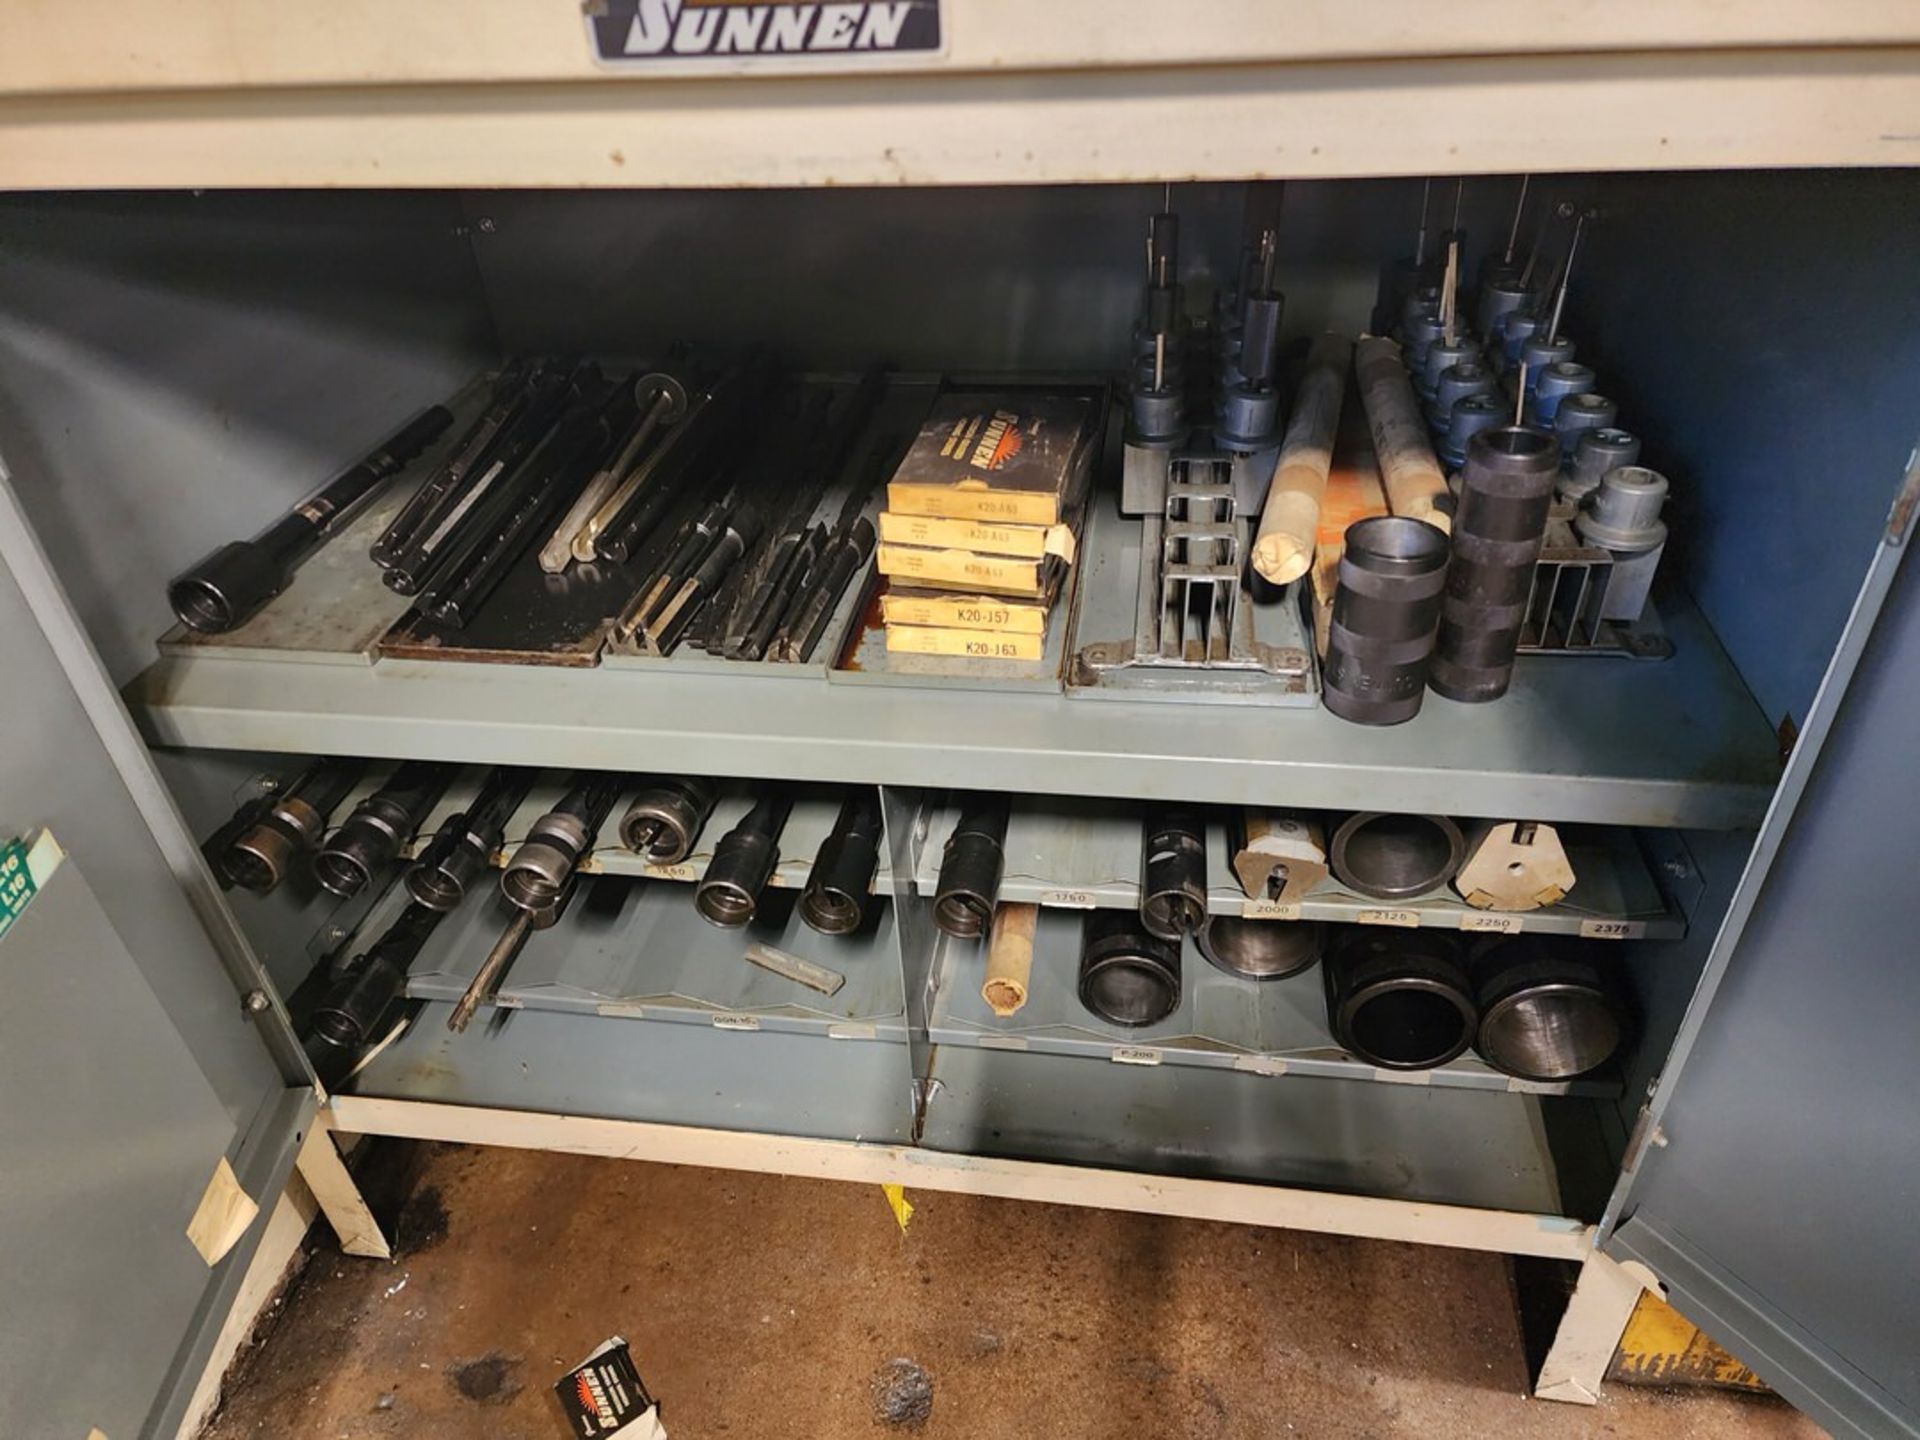 Sunnen MBB-1660 Precision Honing Machine W/ Tooling & Matl. Cabinet - Image 23 of 30